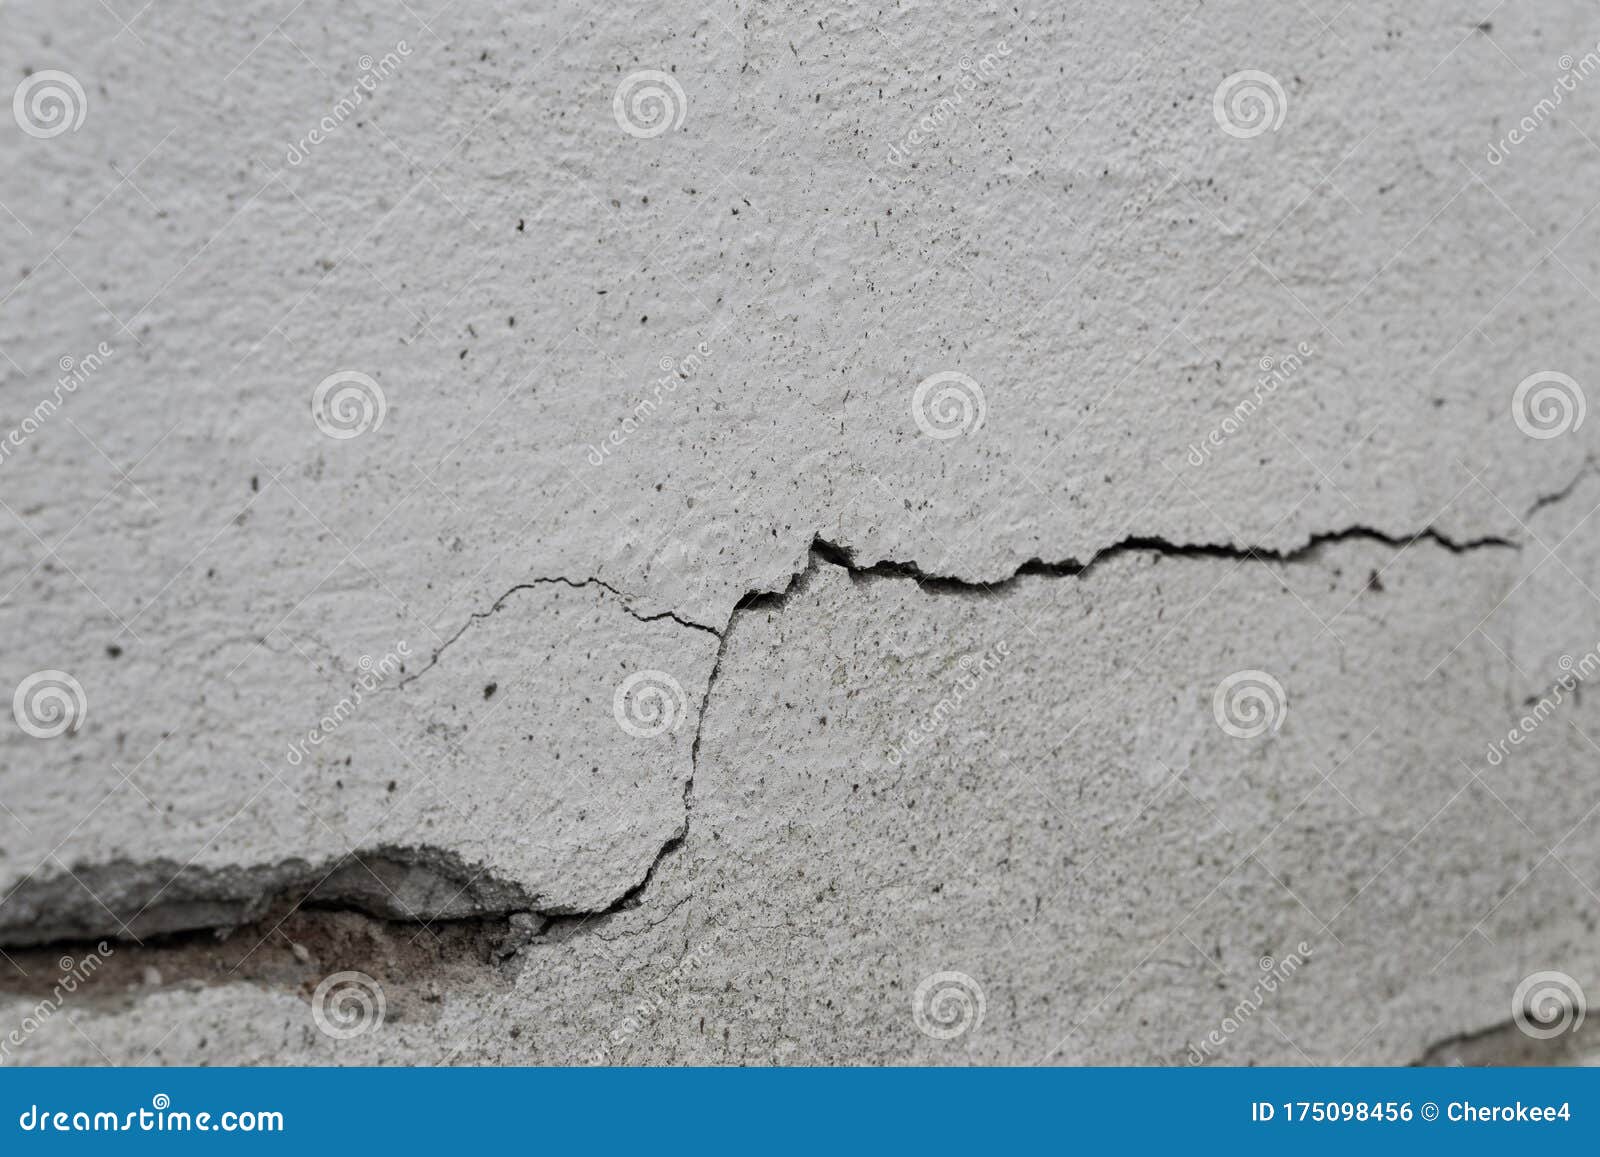 old foundation and plaster wall with cracks. building requiring repair closeup.